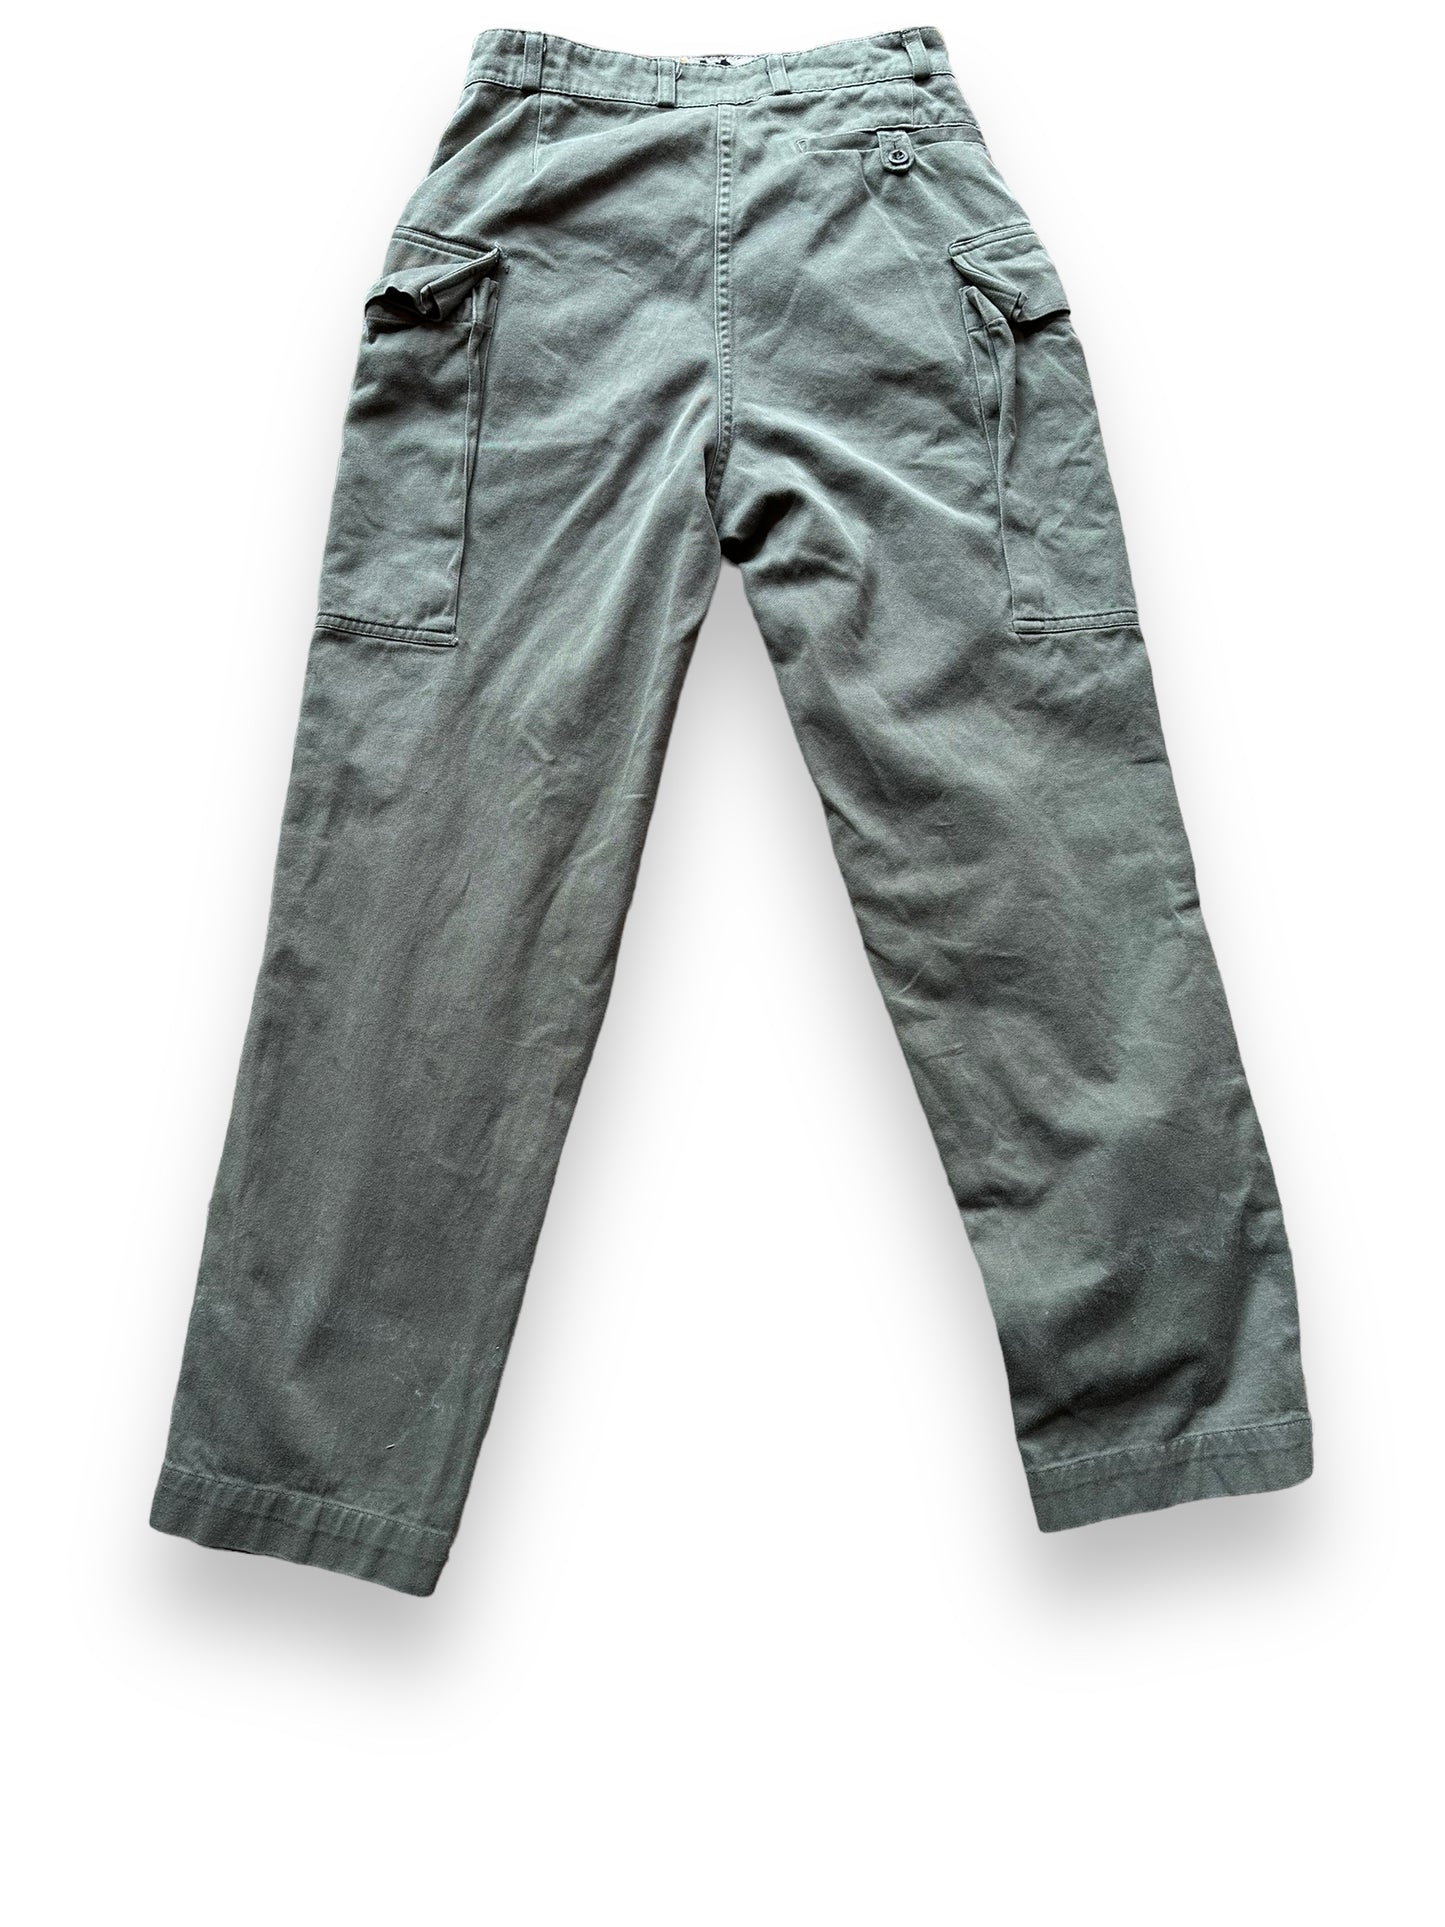 Rear View of Vintage European Workwear Cotton Trousers Olive Drab W28 | Barn Owl Vintage Seattle | Vintage Workwear Trousers Seattle